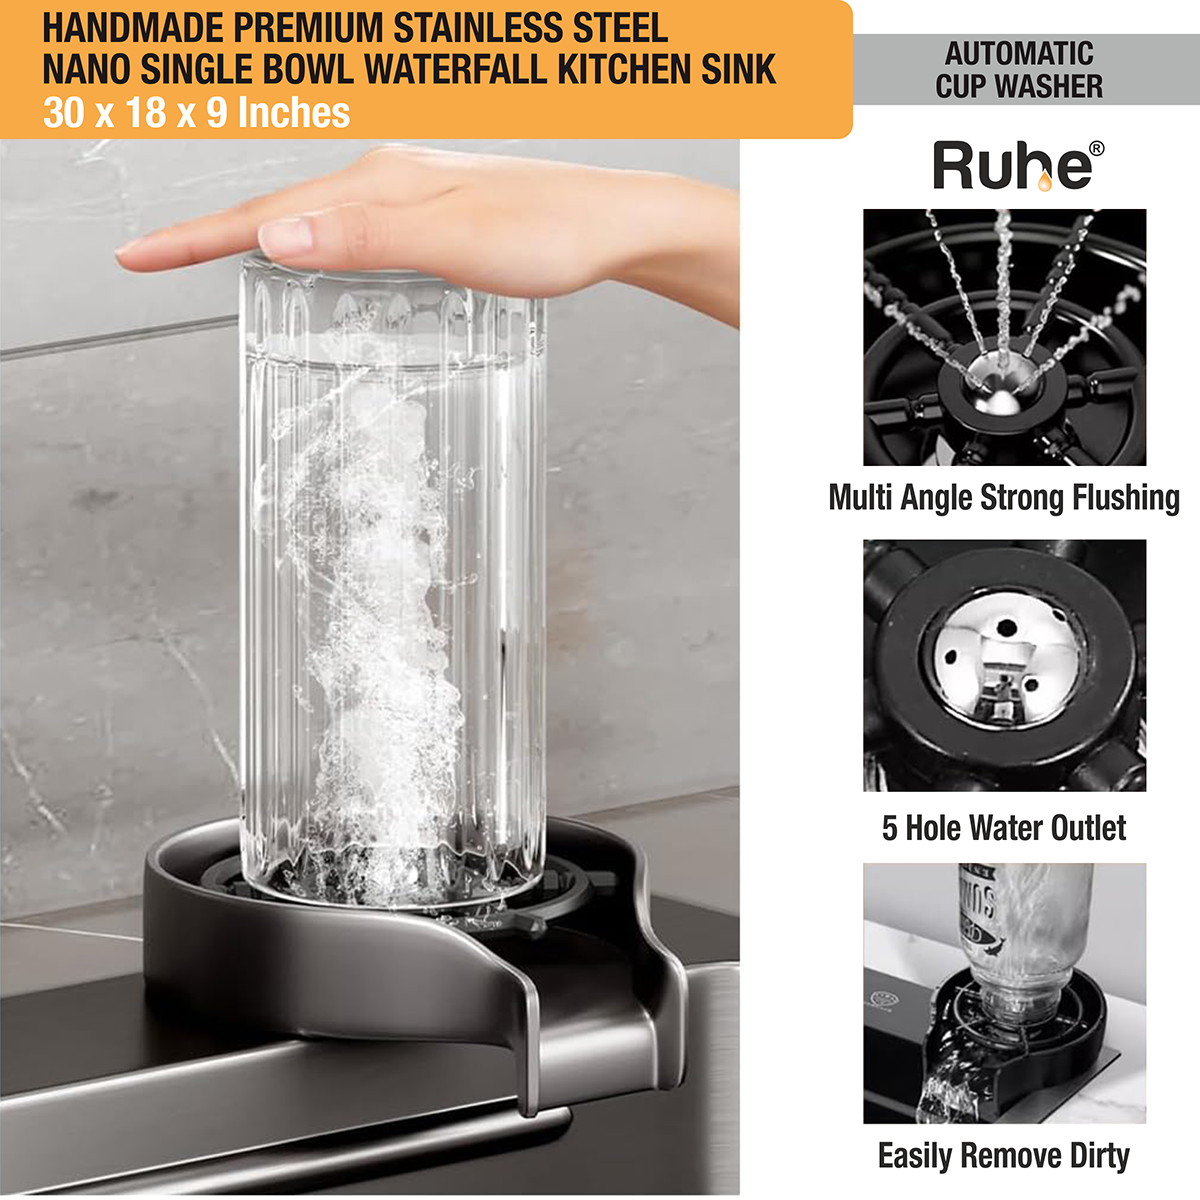  Handmade Premium Nano Kitchen Sink with Integrated Waterfall, Pull-Out & RO Faucet (30 x 18 x 9 Inches) 6